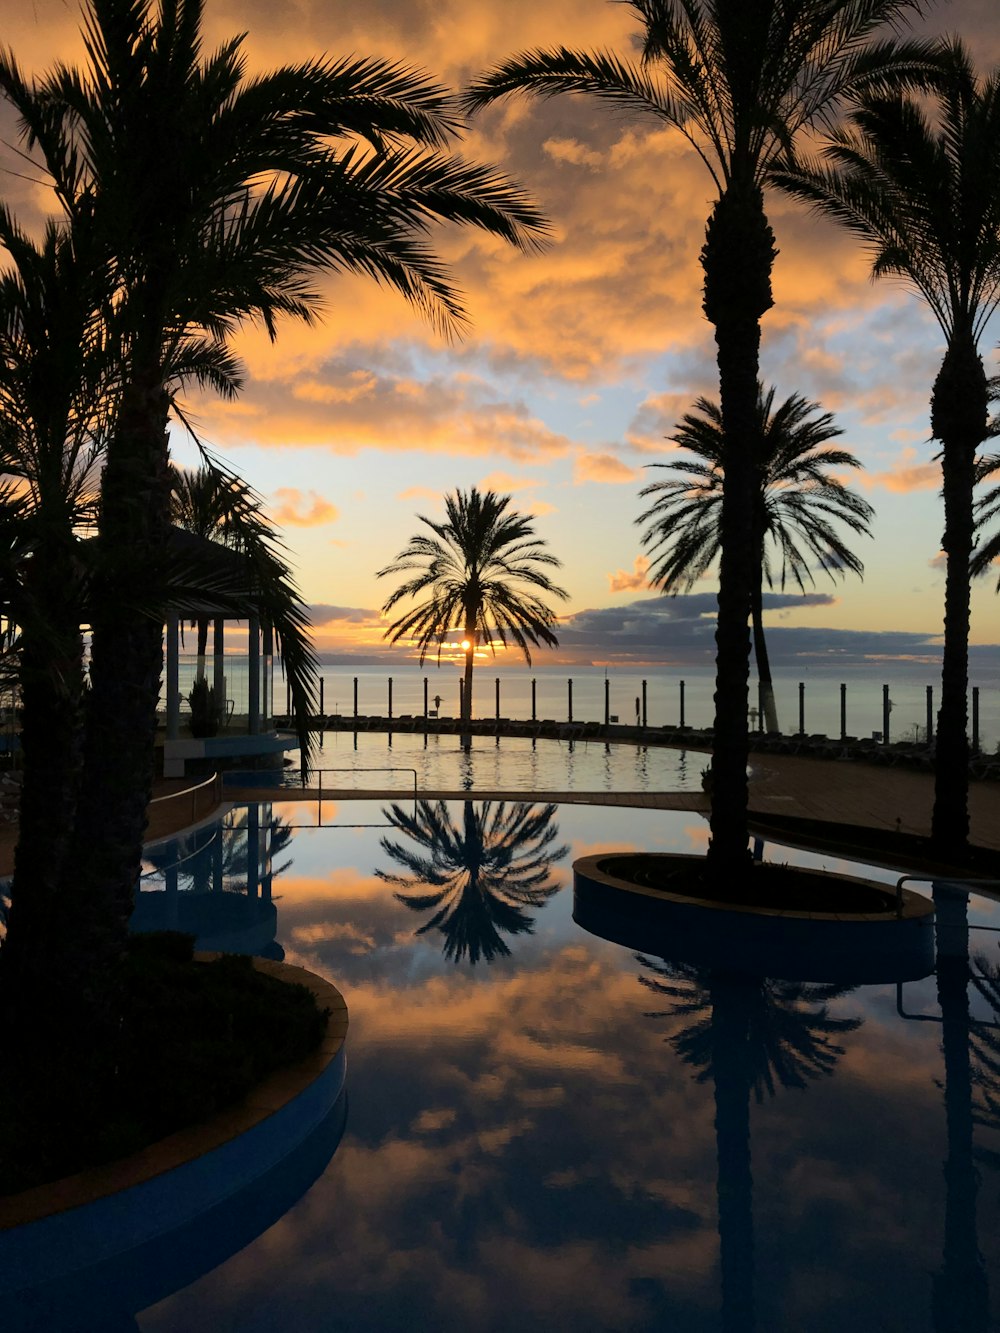 palm trees near swimming pool during sunset